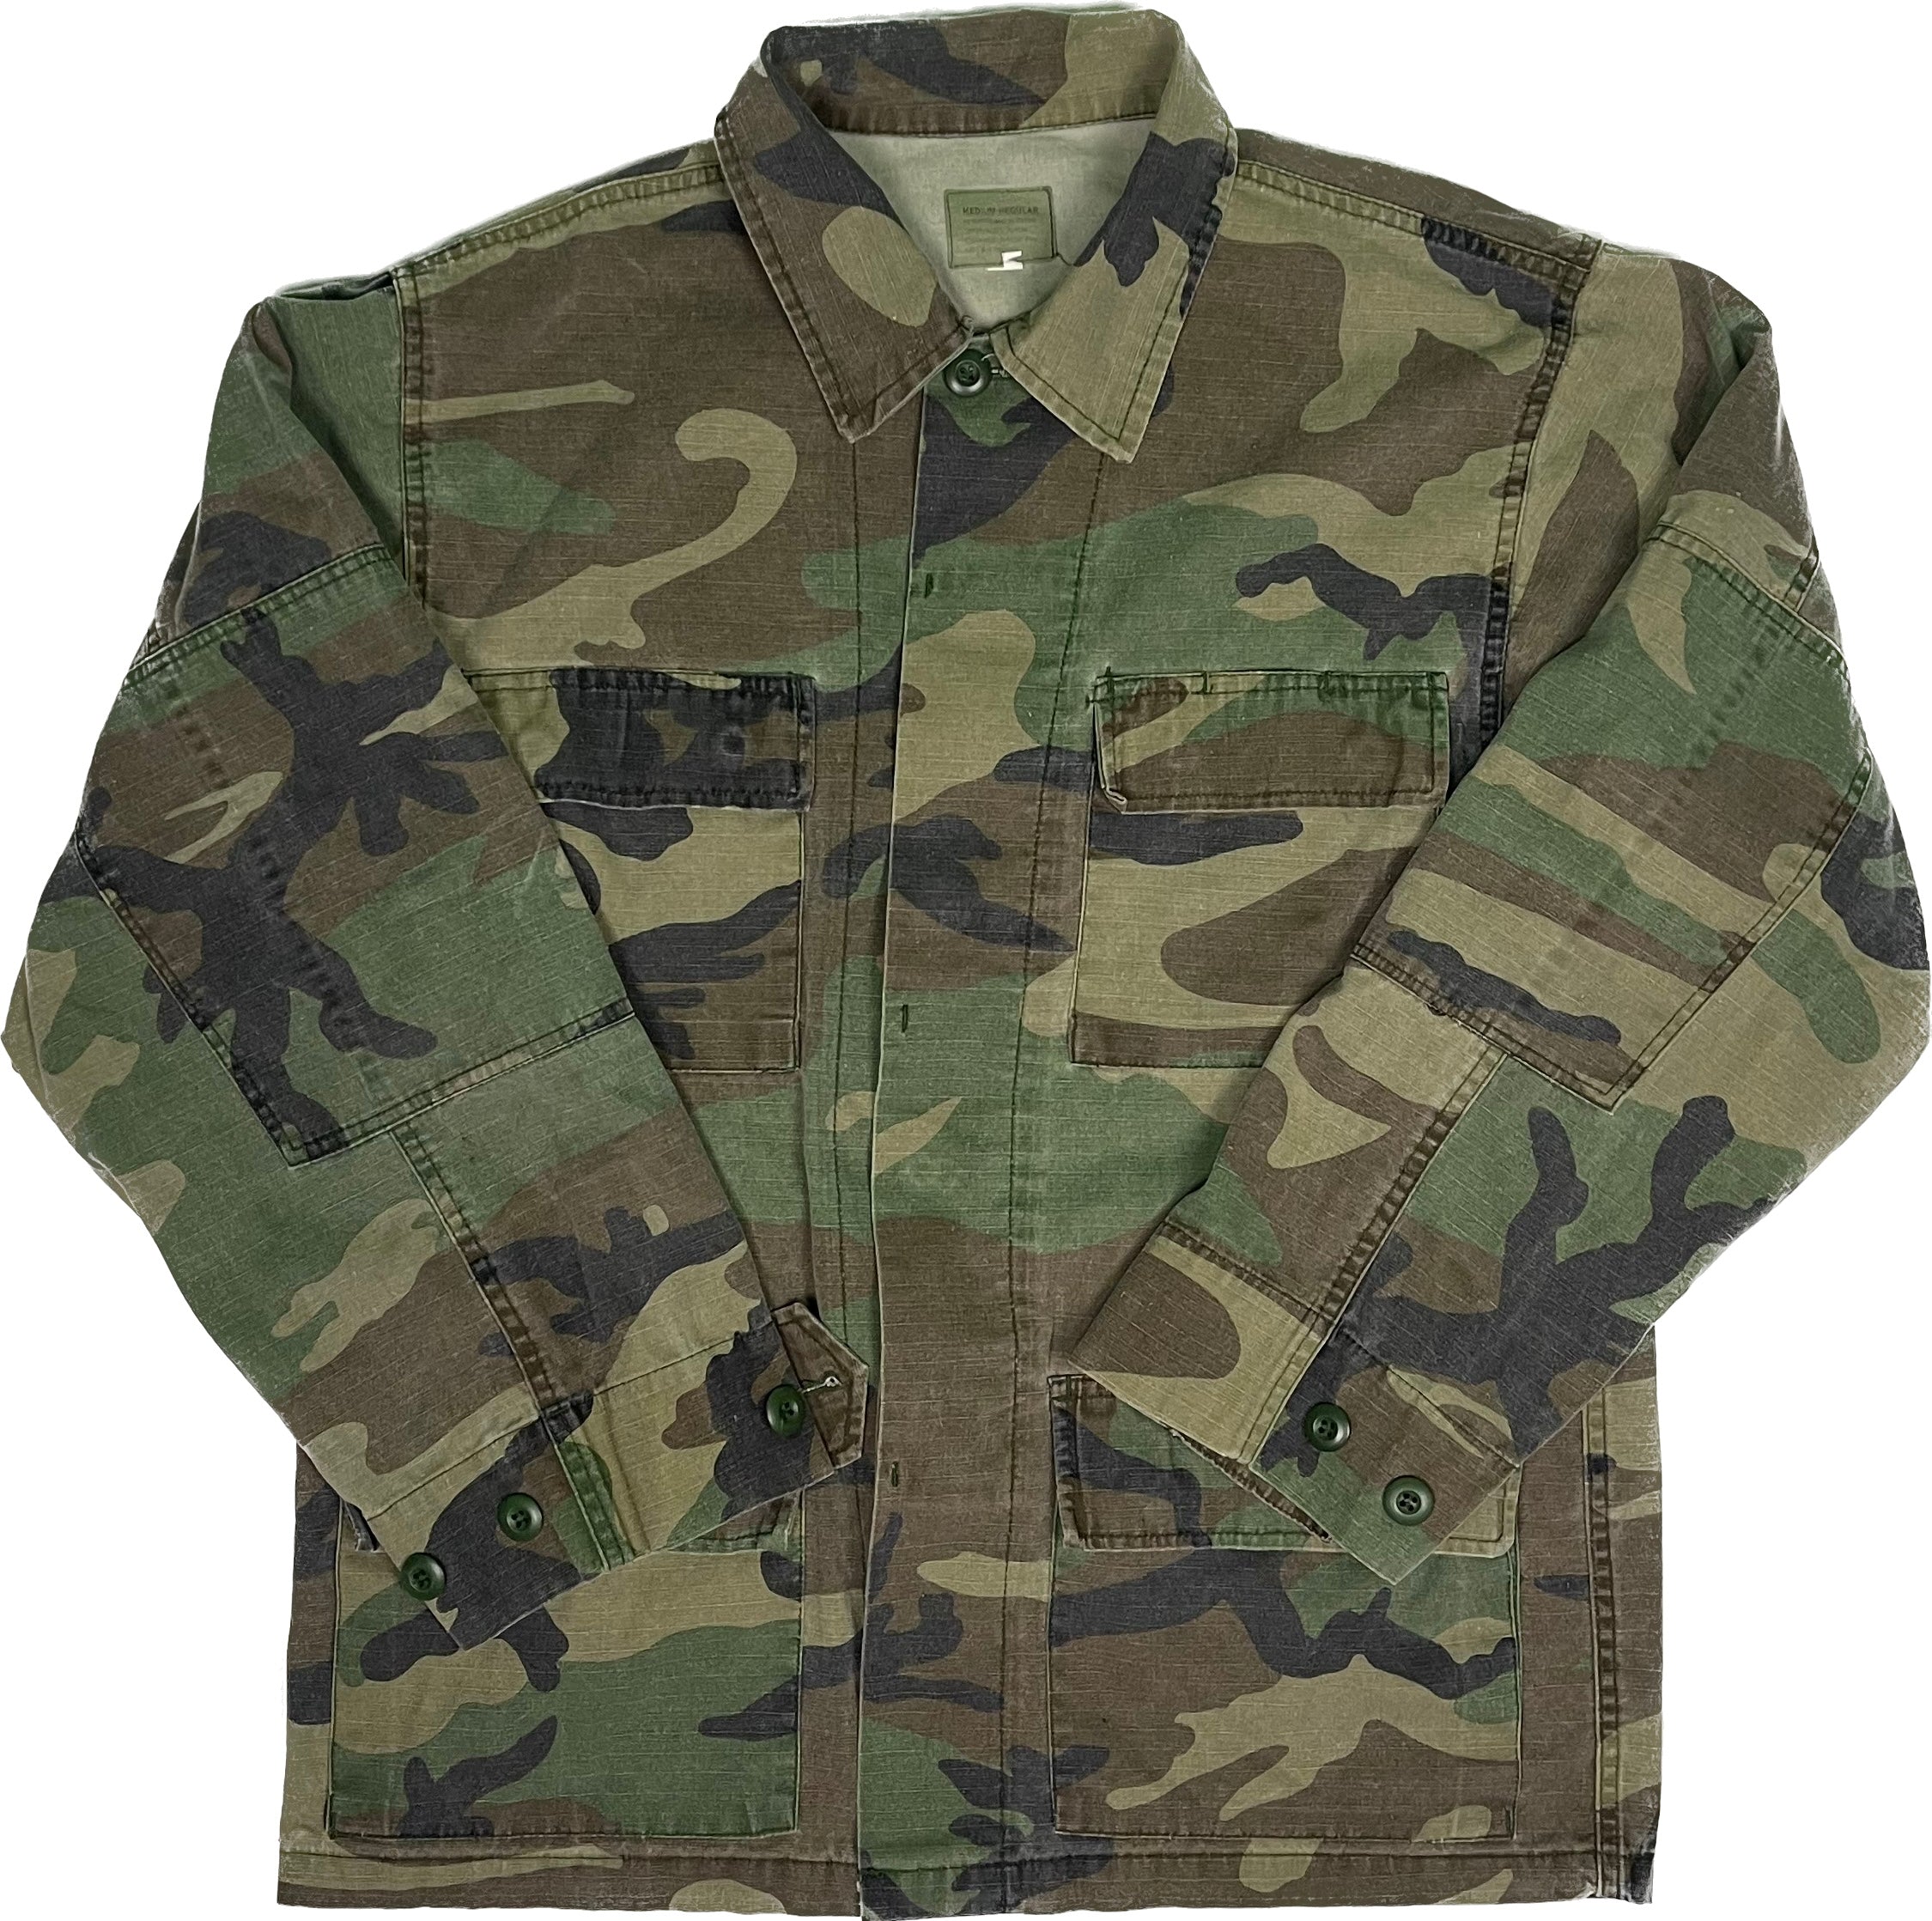 US Air Force Military Jacket